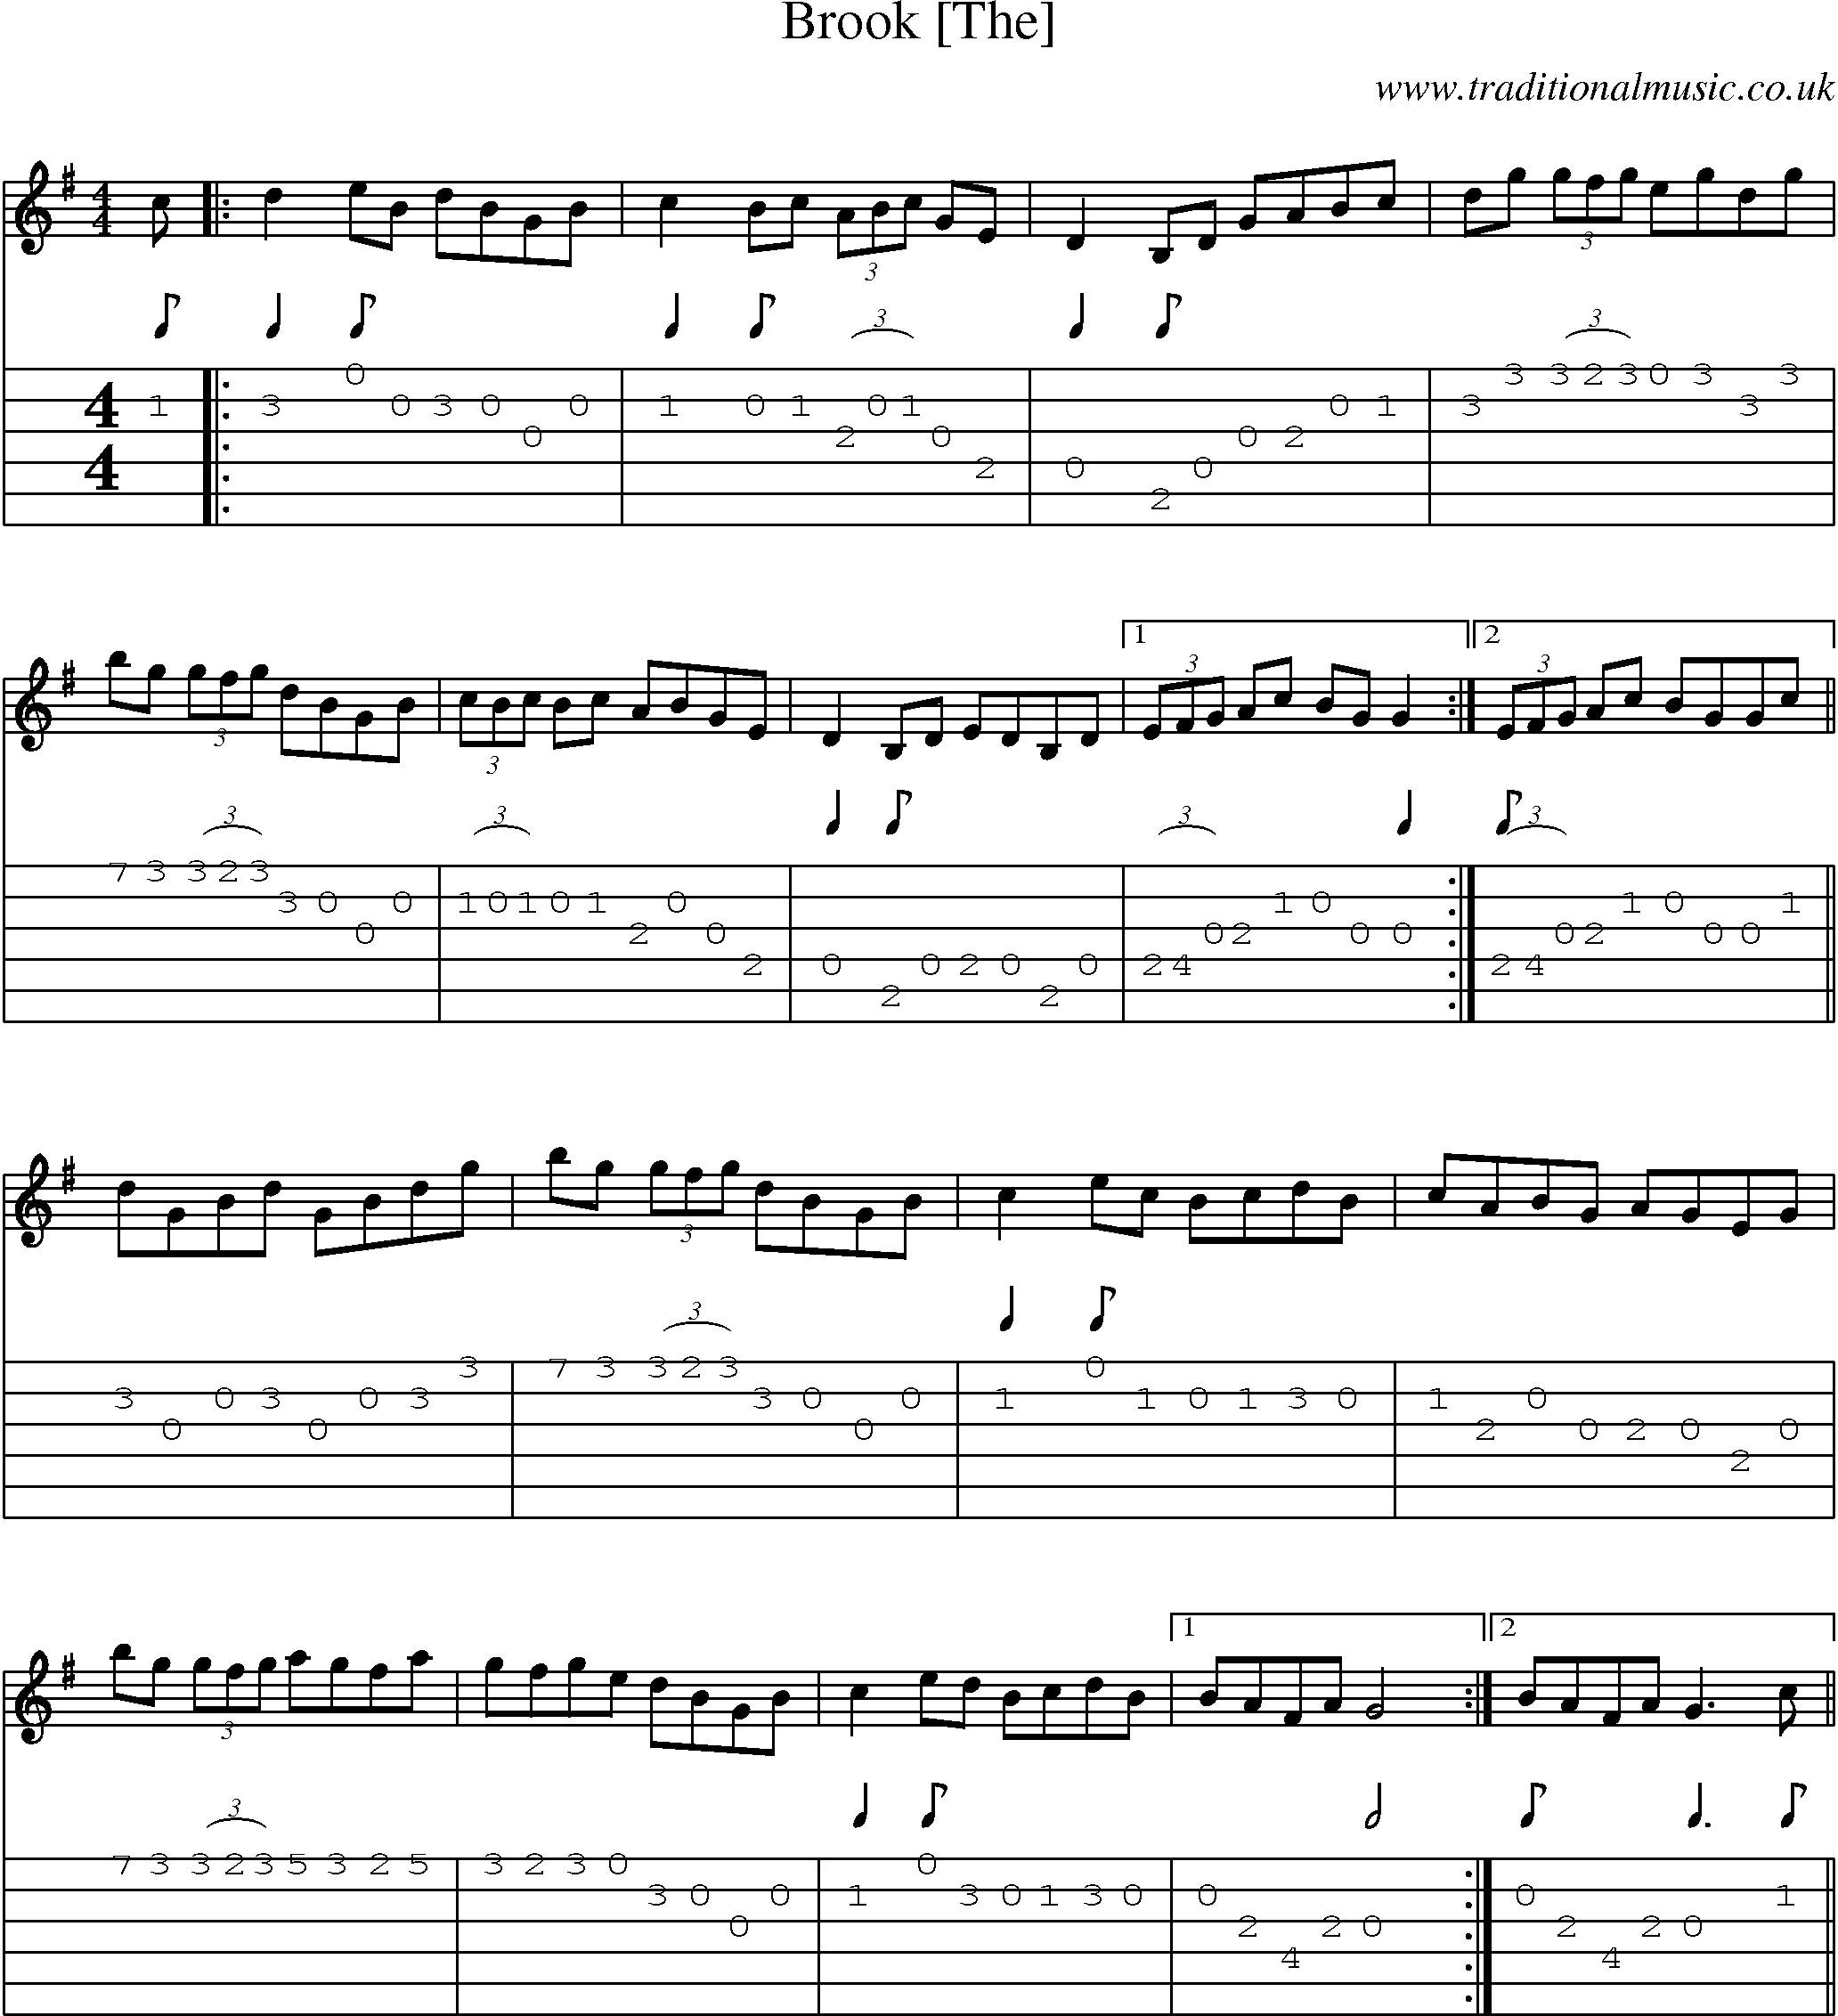 Music Score and Guitar Tabs for Brook